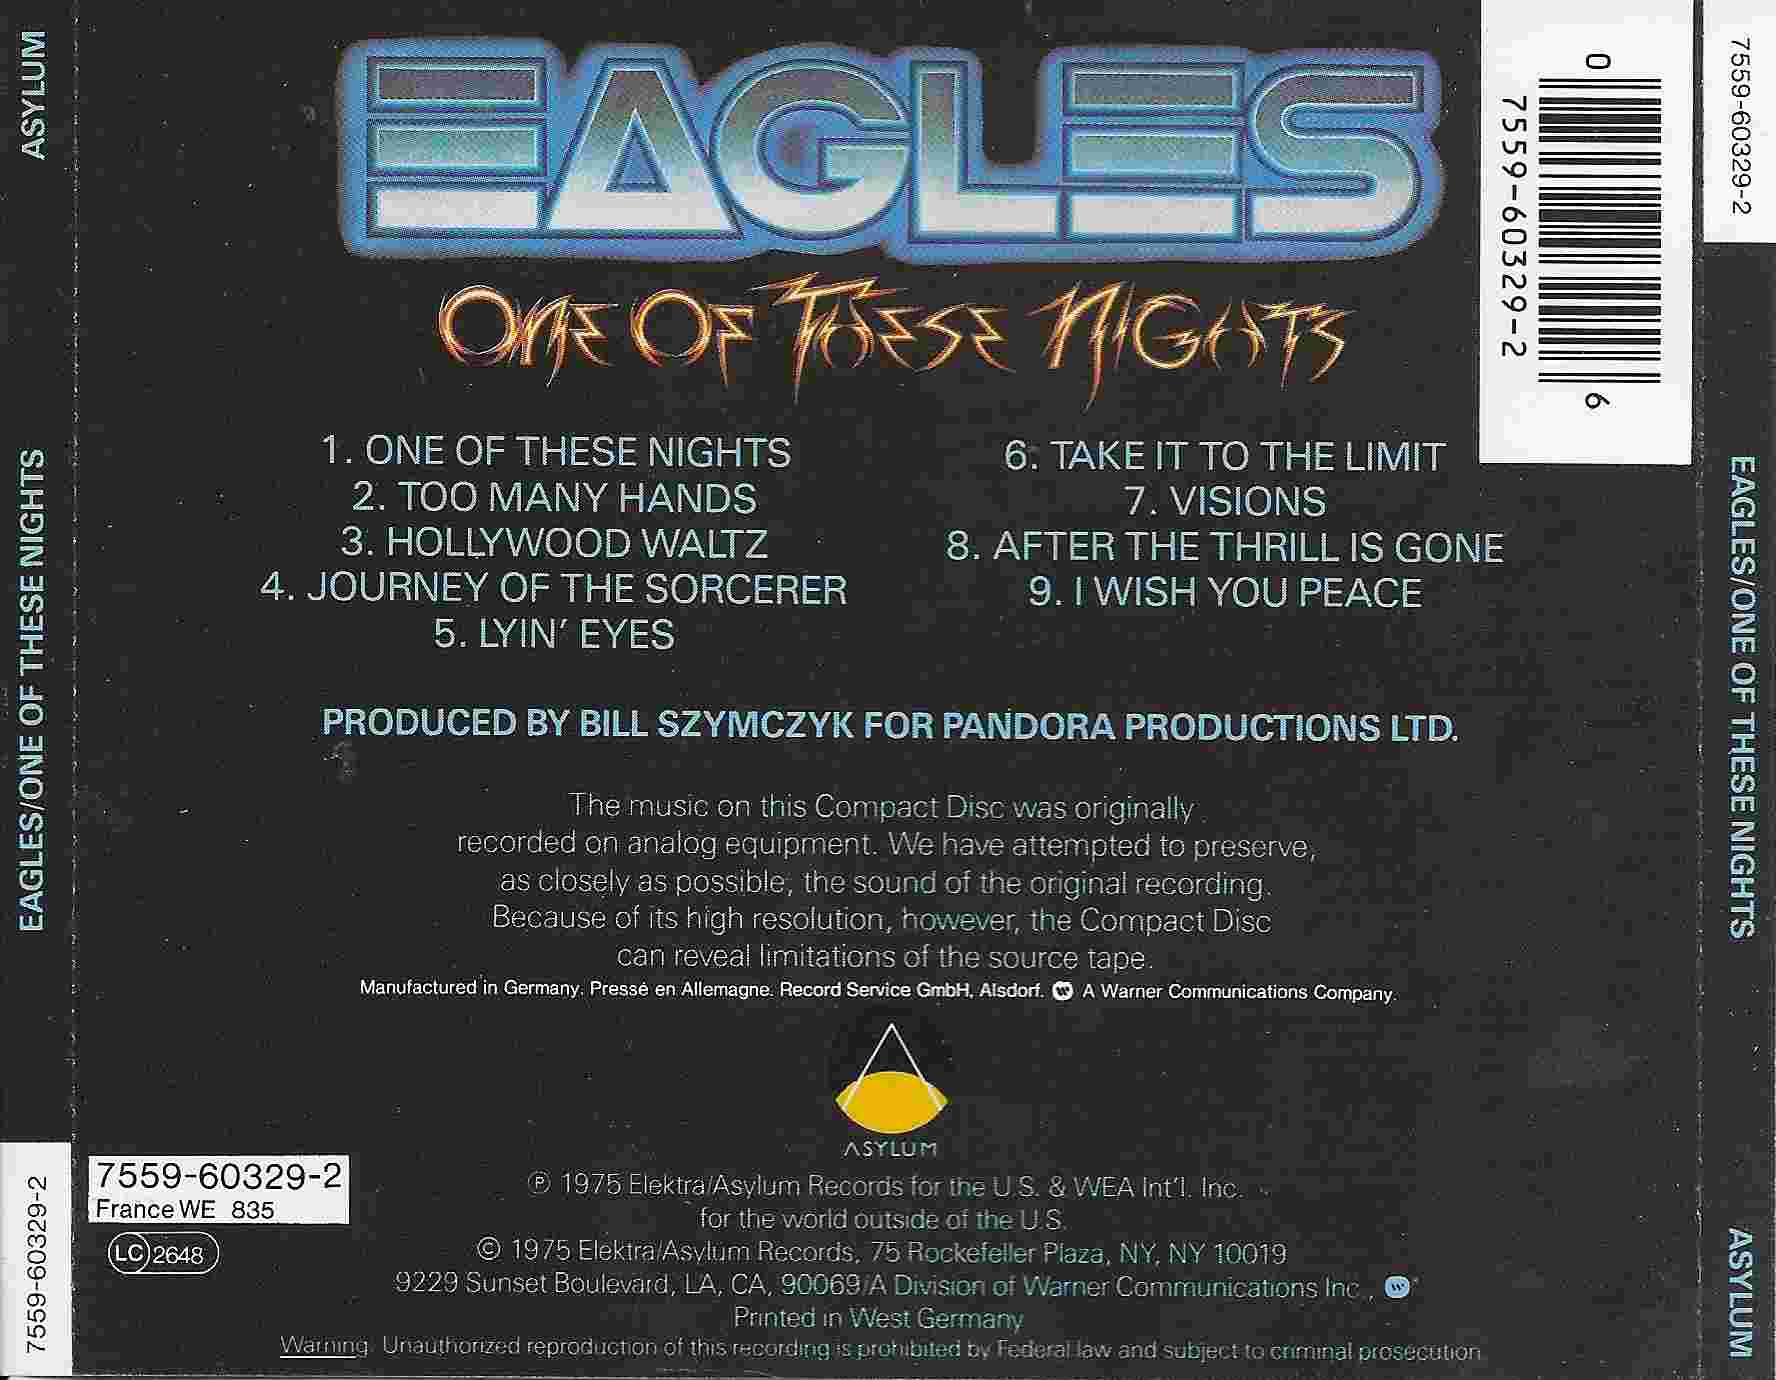 Picture of 7559-60329-2 One of those nights by artist Eagles 